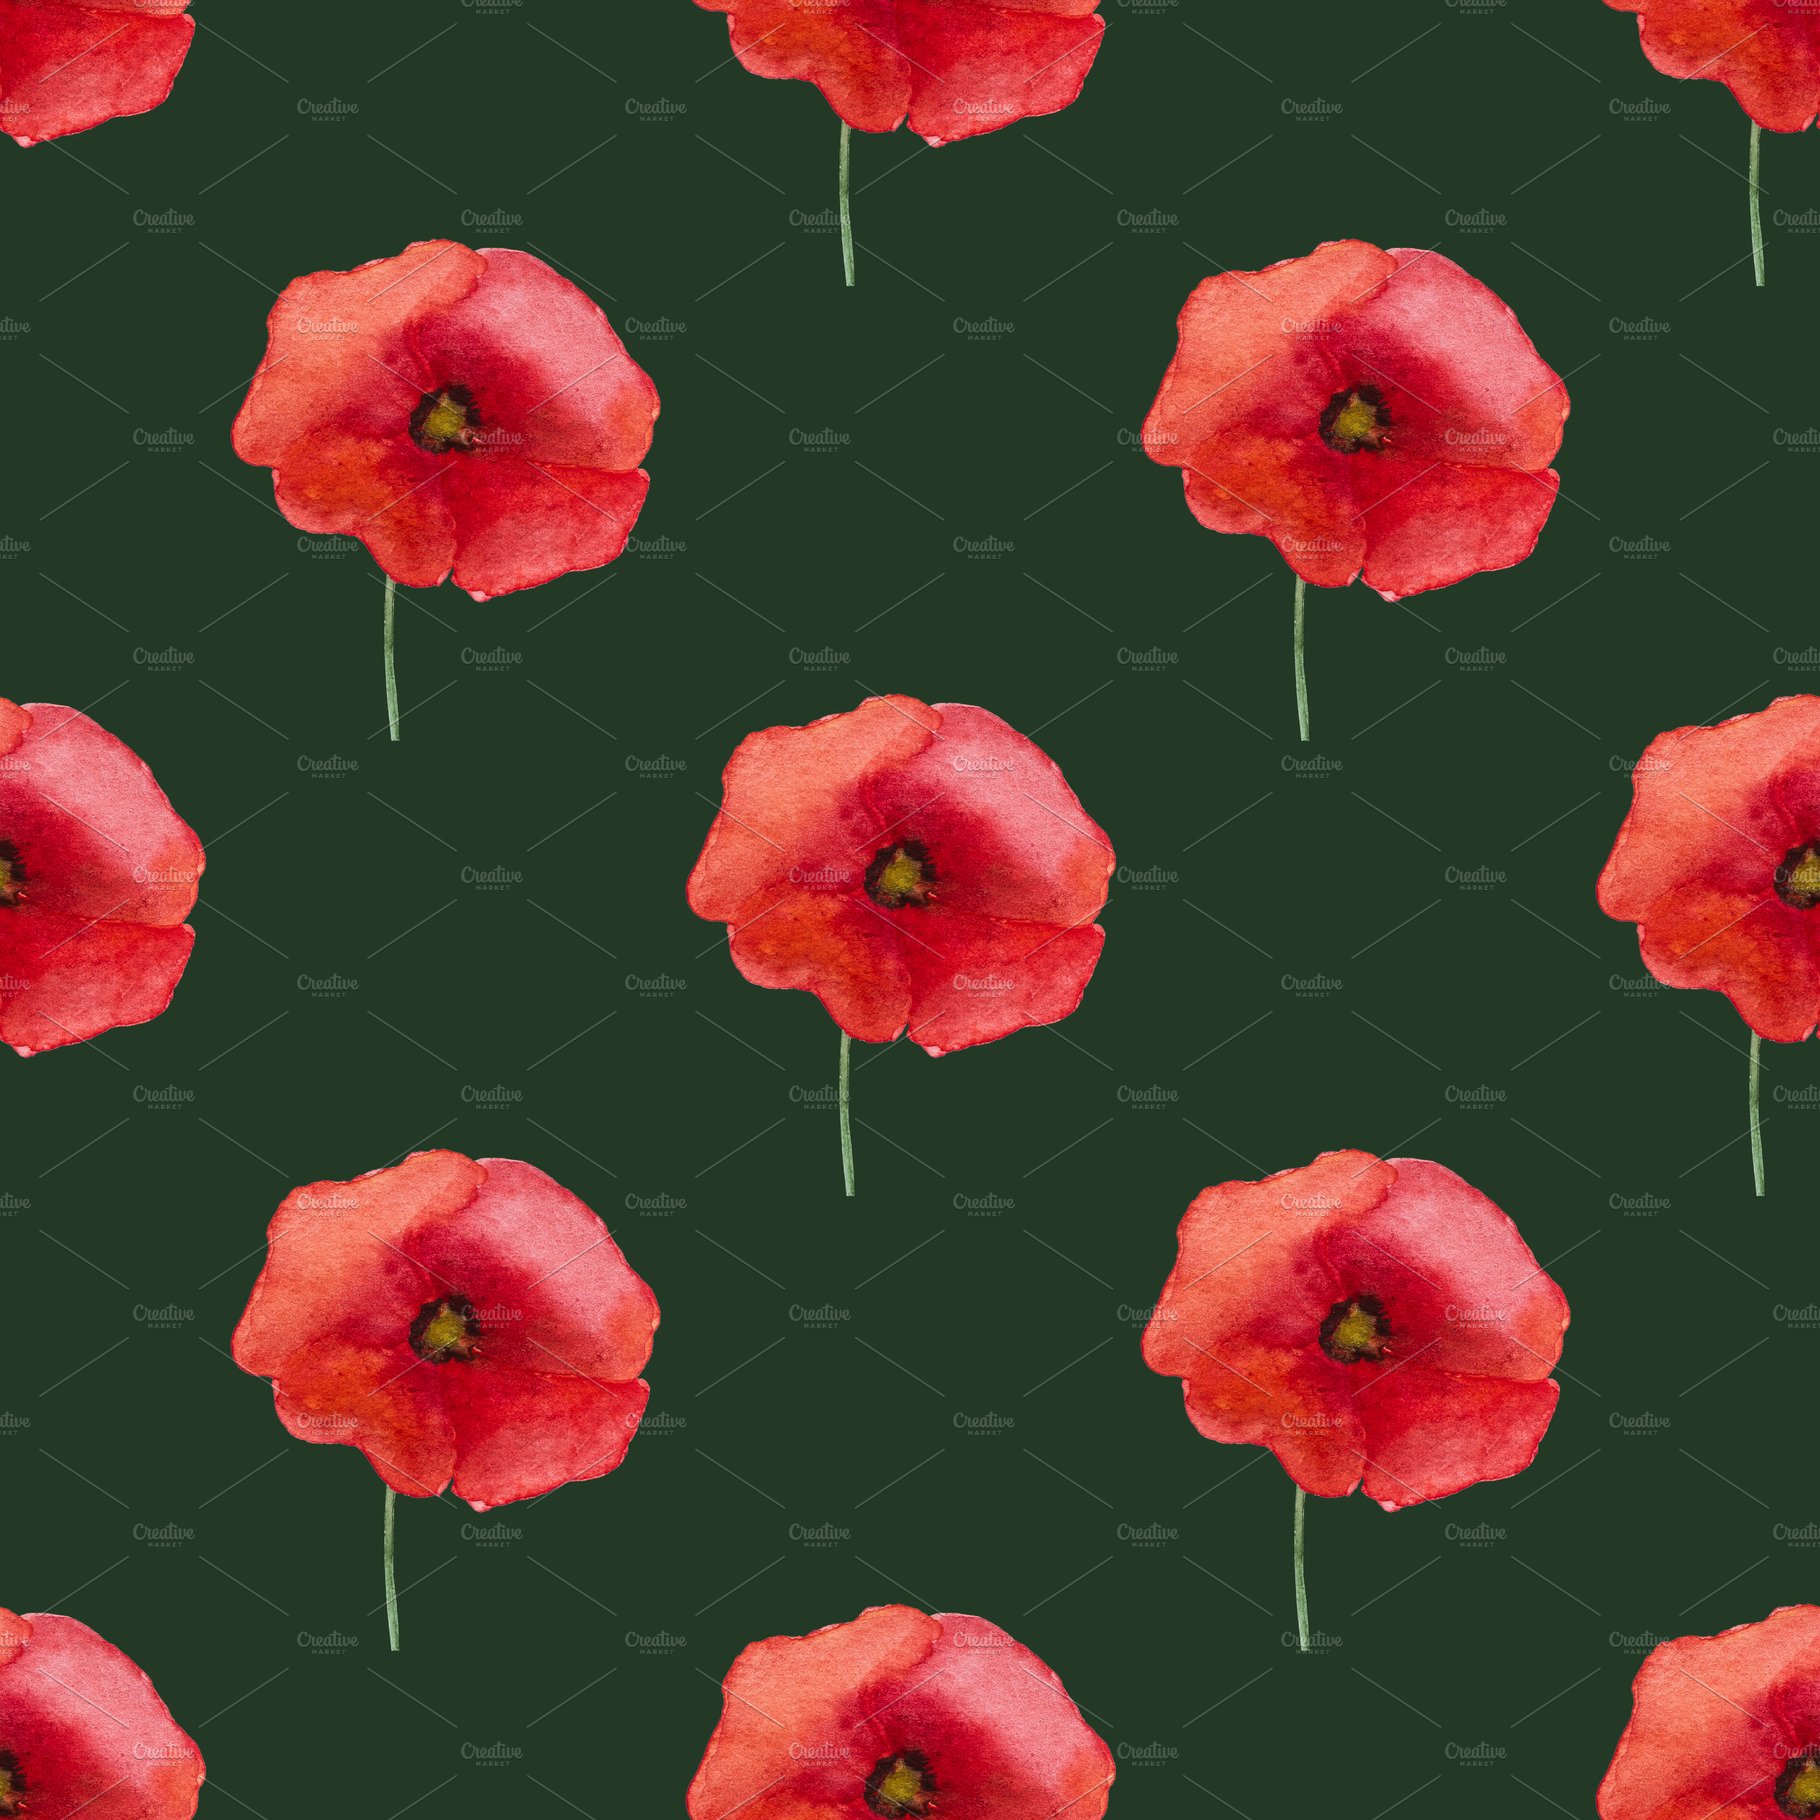 Beautiful picture of poppy flowers. Happy Remembrance Day cover image.